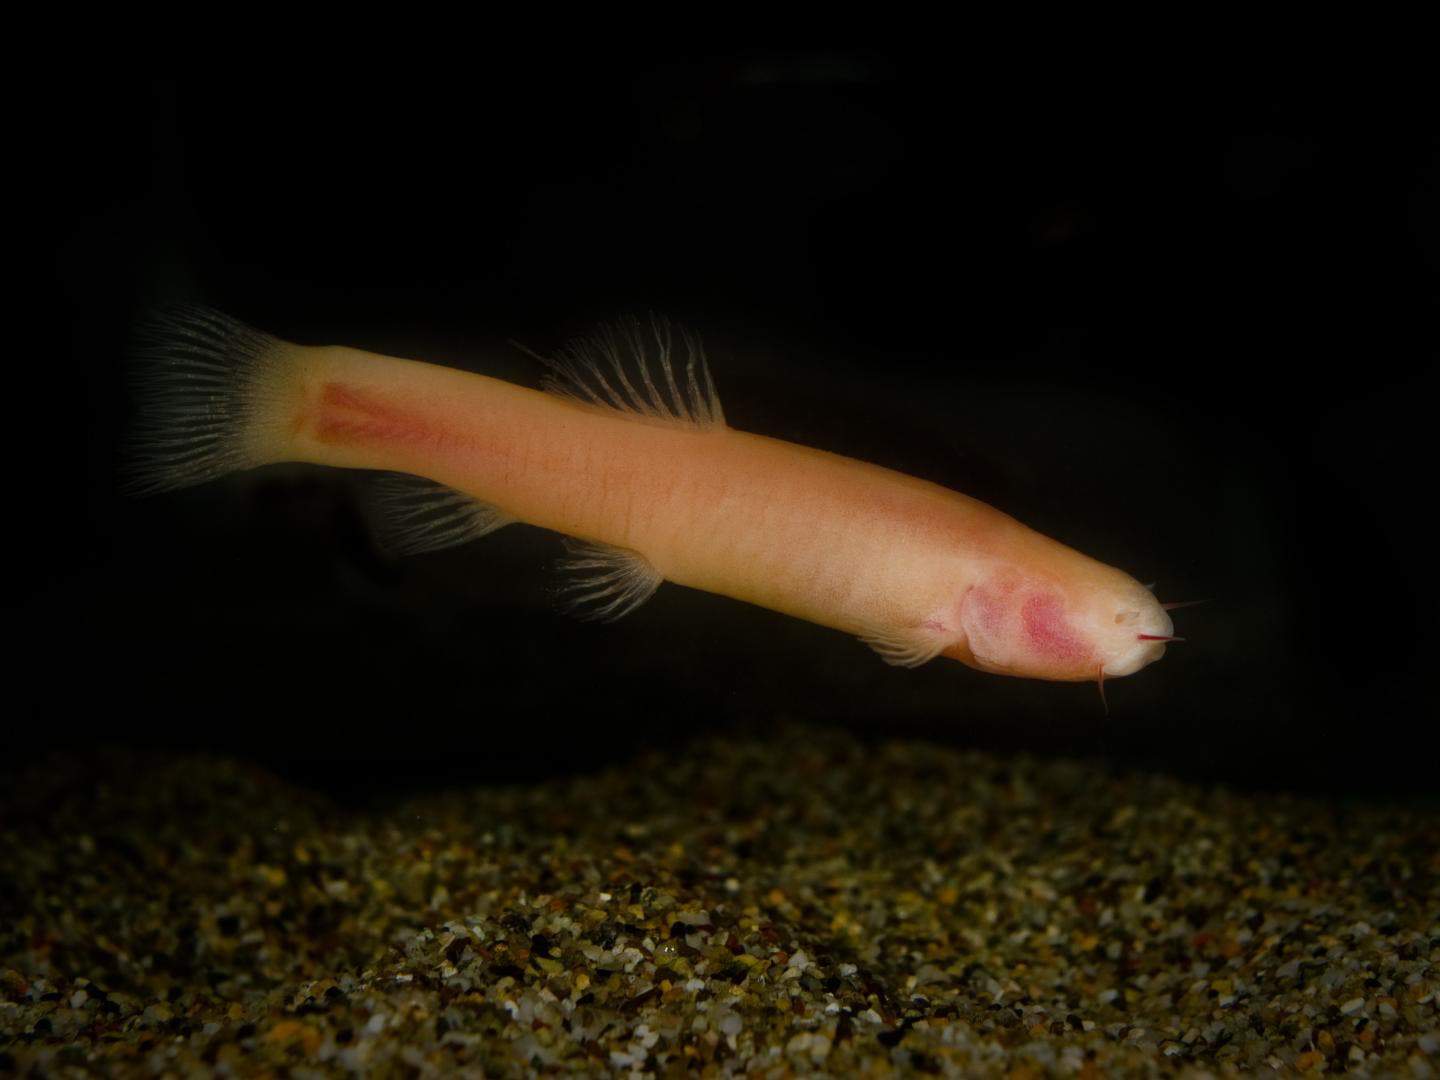 This image shows a Somalian blind cavefish that, after evolving for millions of years in darkness, has lost the capacity to harness light for repairing DNA. Image credits: Luca Scapoli / University of Ferrara.